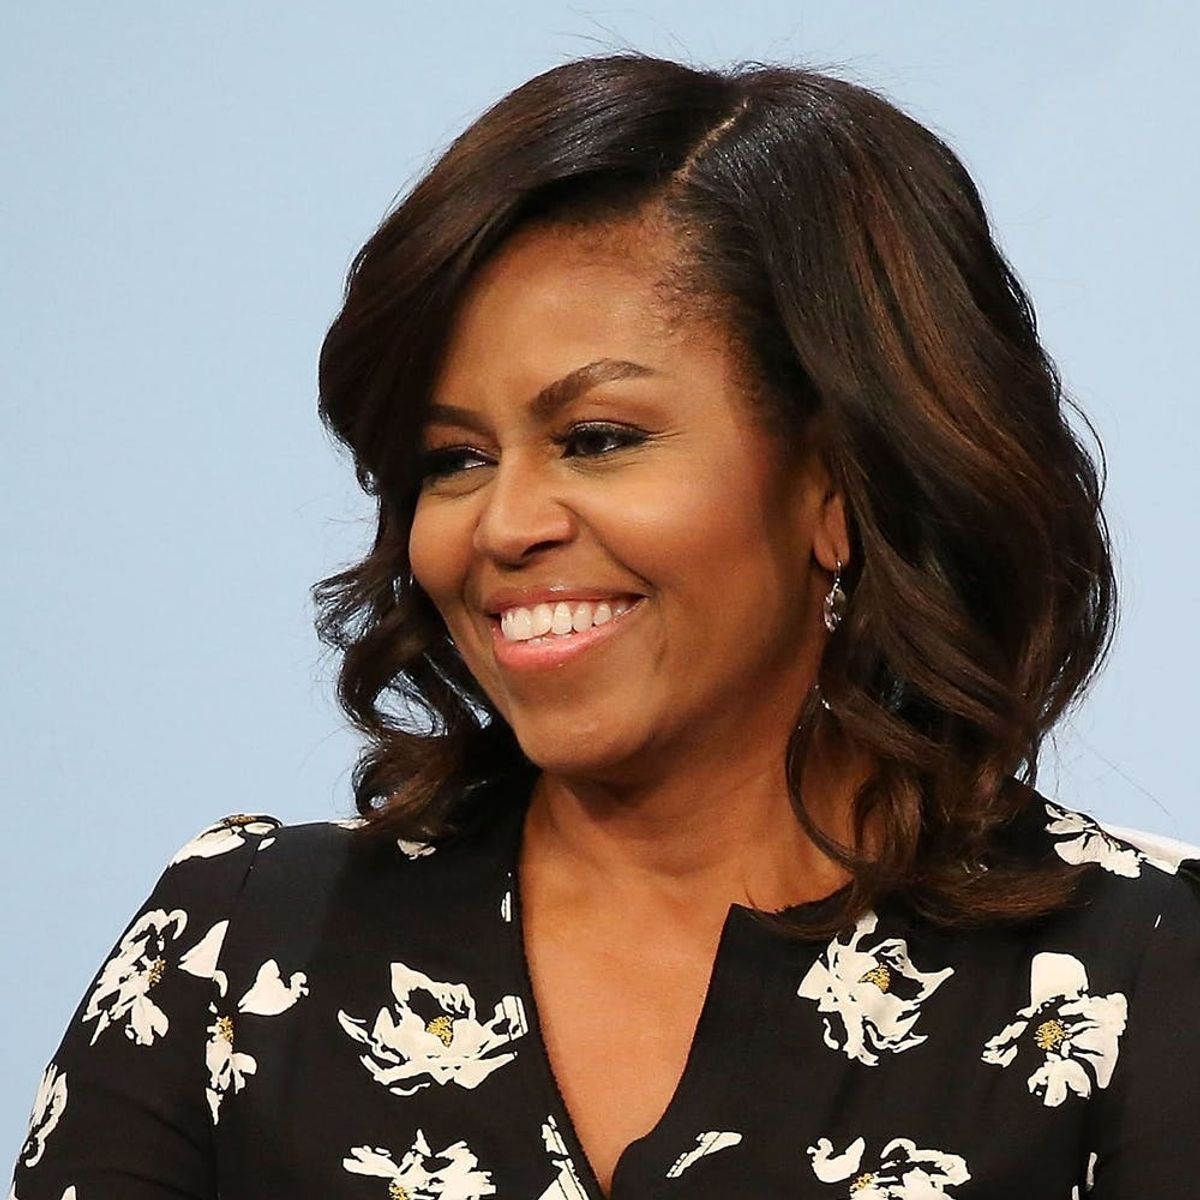 Michelle Obama Is Giving Us All the #VacayGoals With Her Seriously Relaxed Beach Style